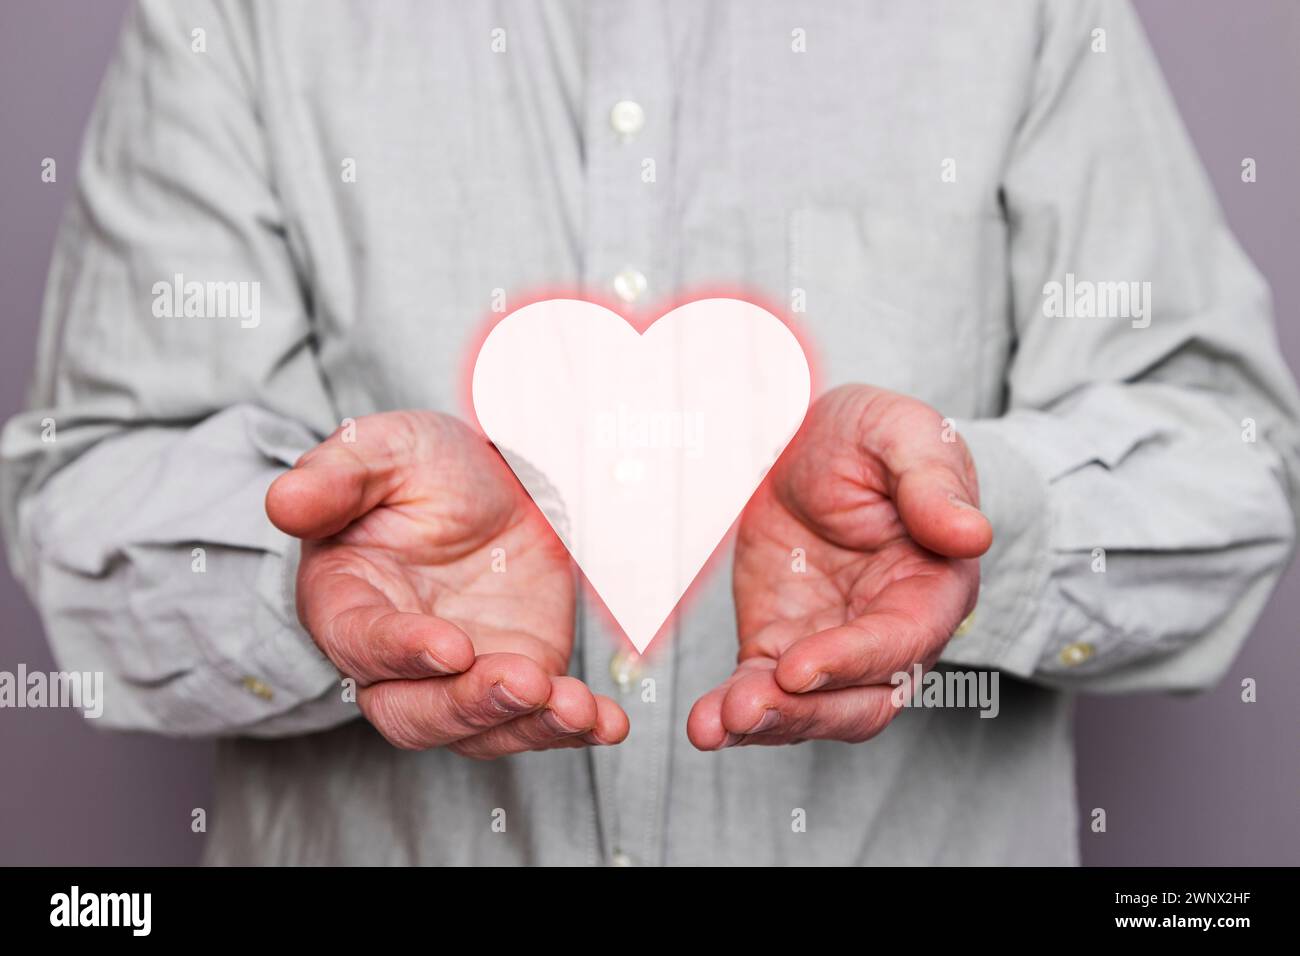 Close-up of an unrecognizable person's hands holding a floating heart shape. Stock Photo